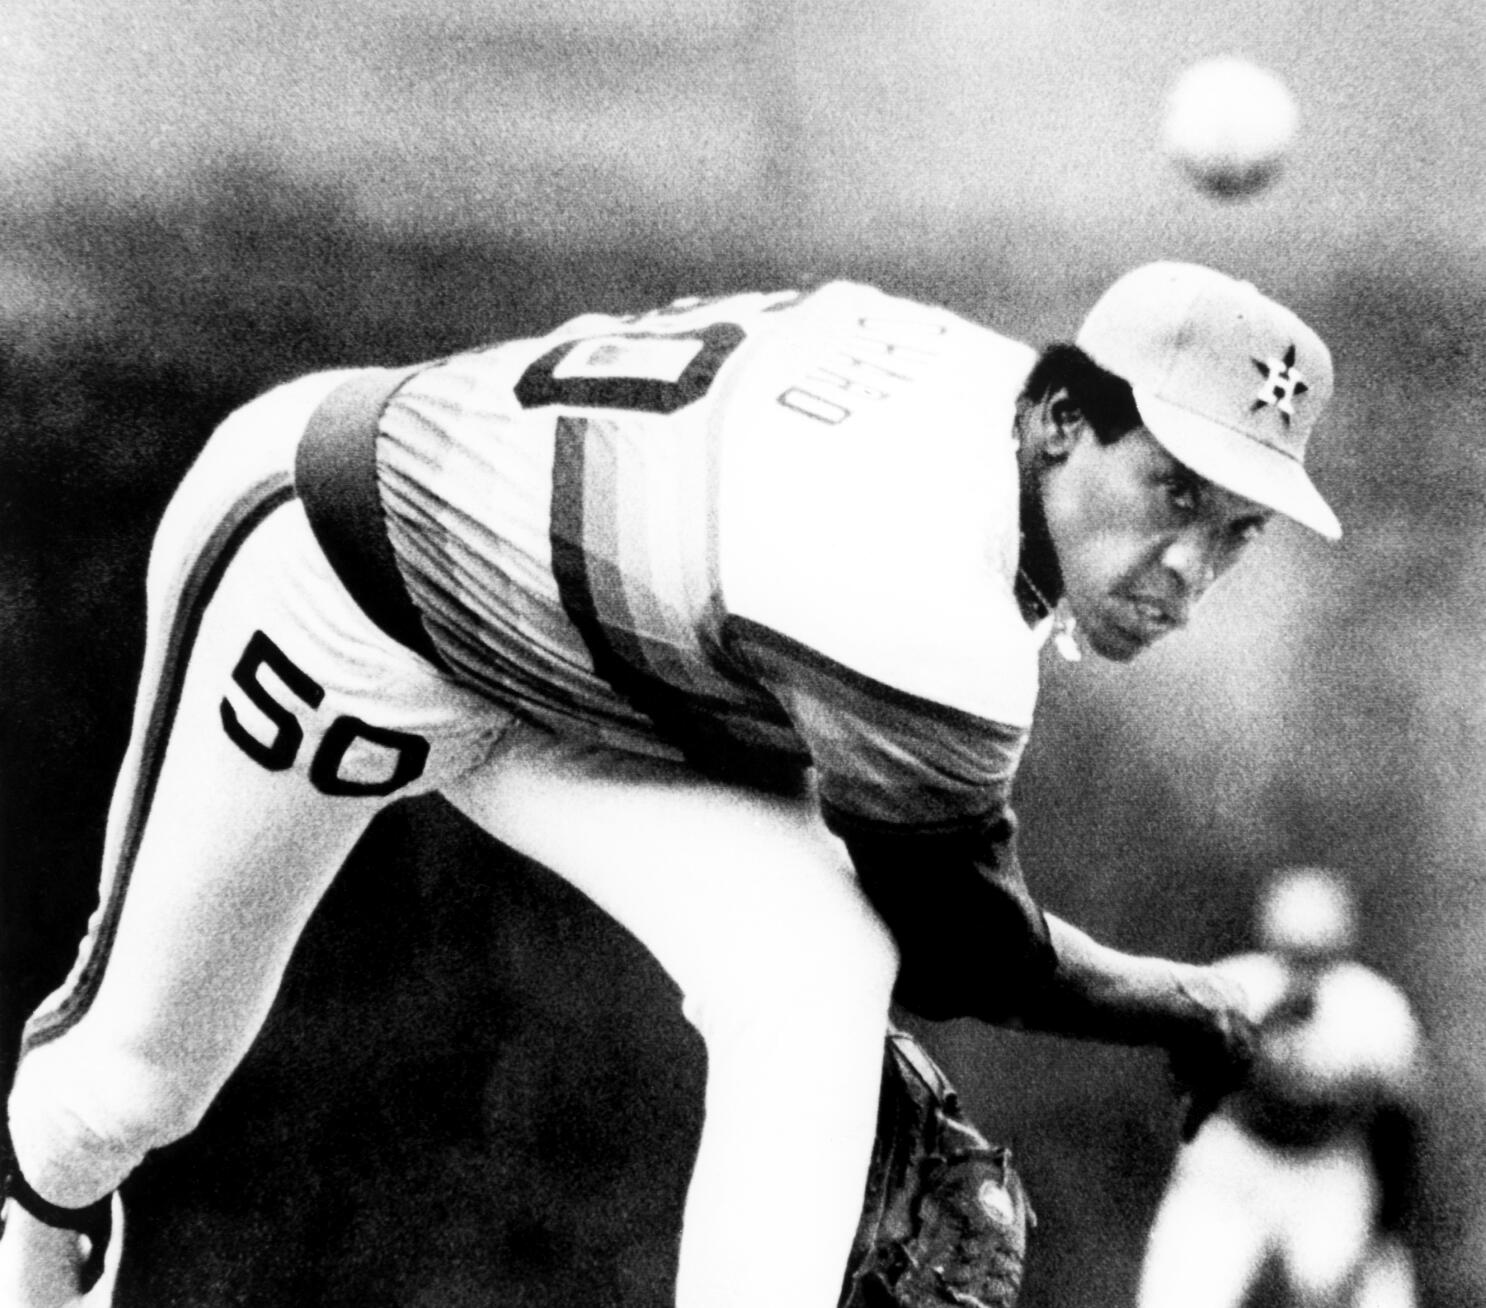 Astros hall of famer and Louisiana native J.R. Richard dies at 71